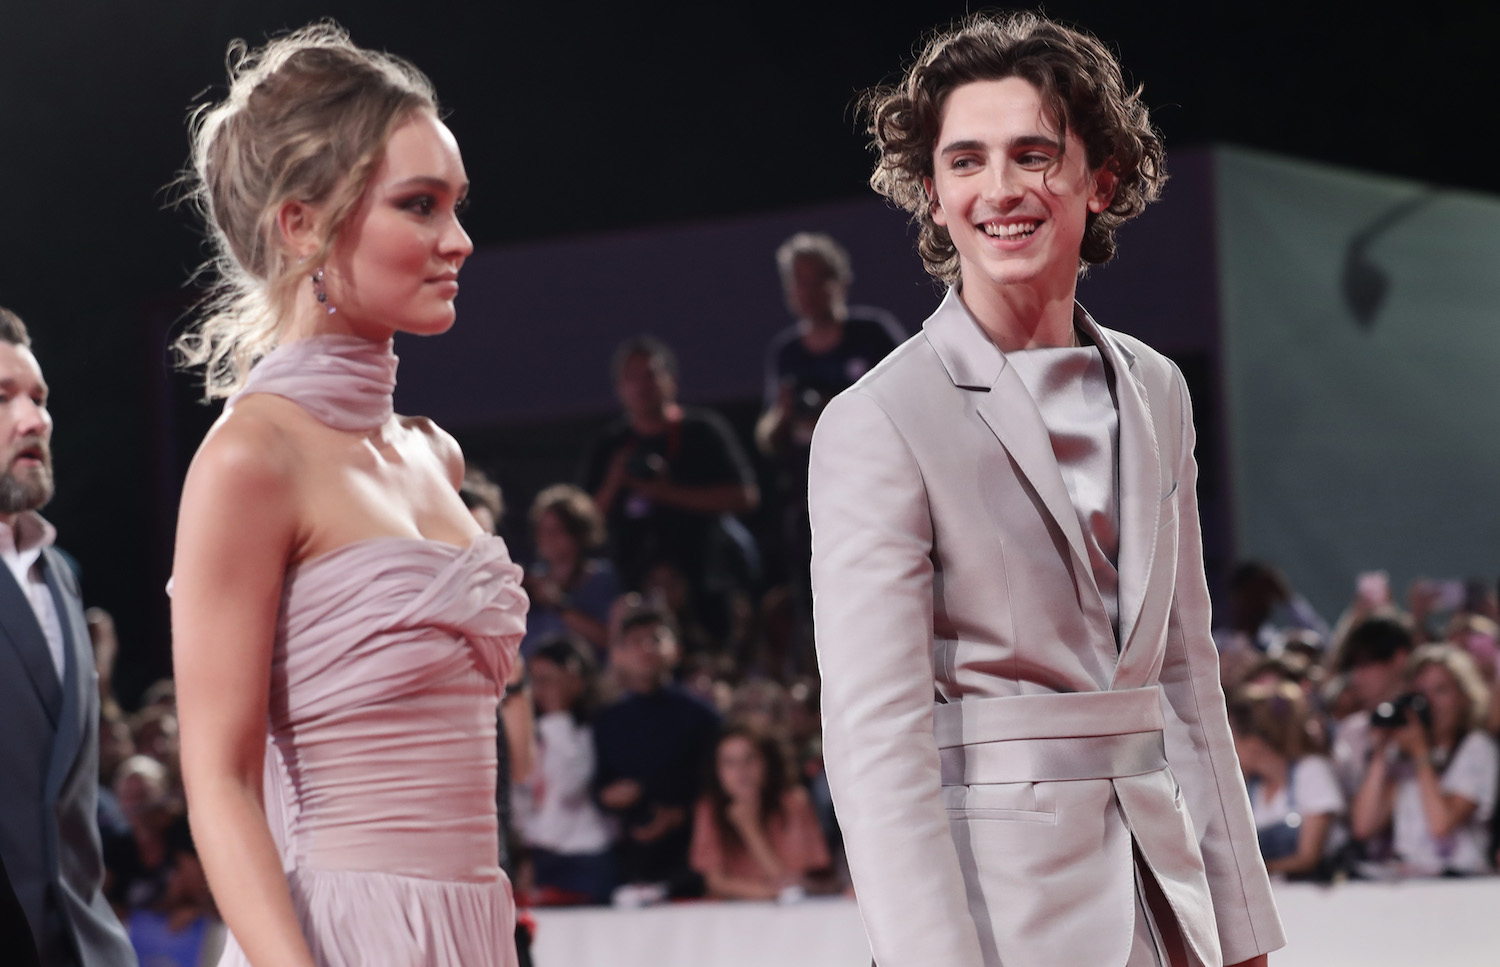 Timothée Chalamet And Lily-Rose Depp Just Made Their Red Carpet Debut